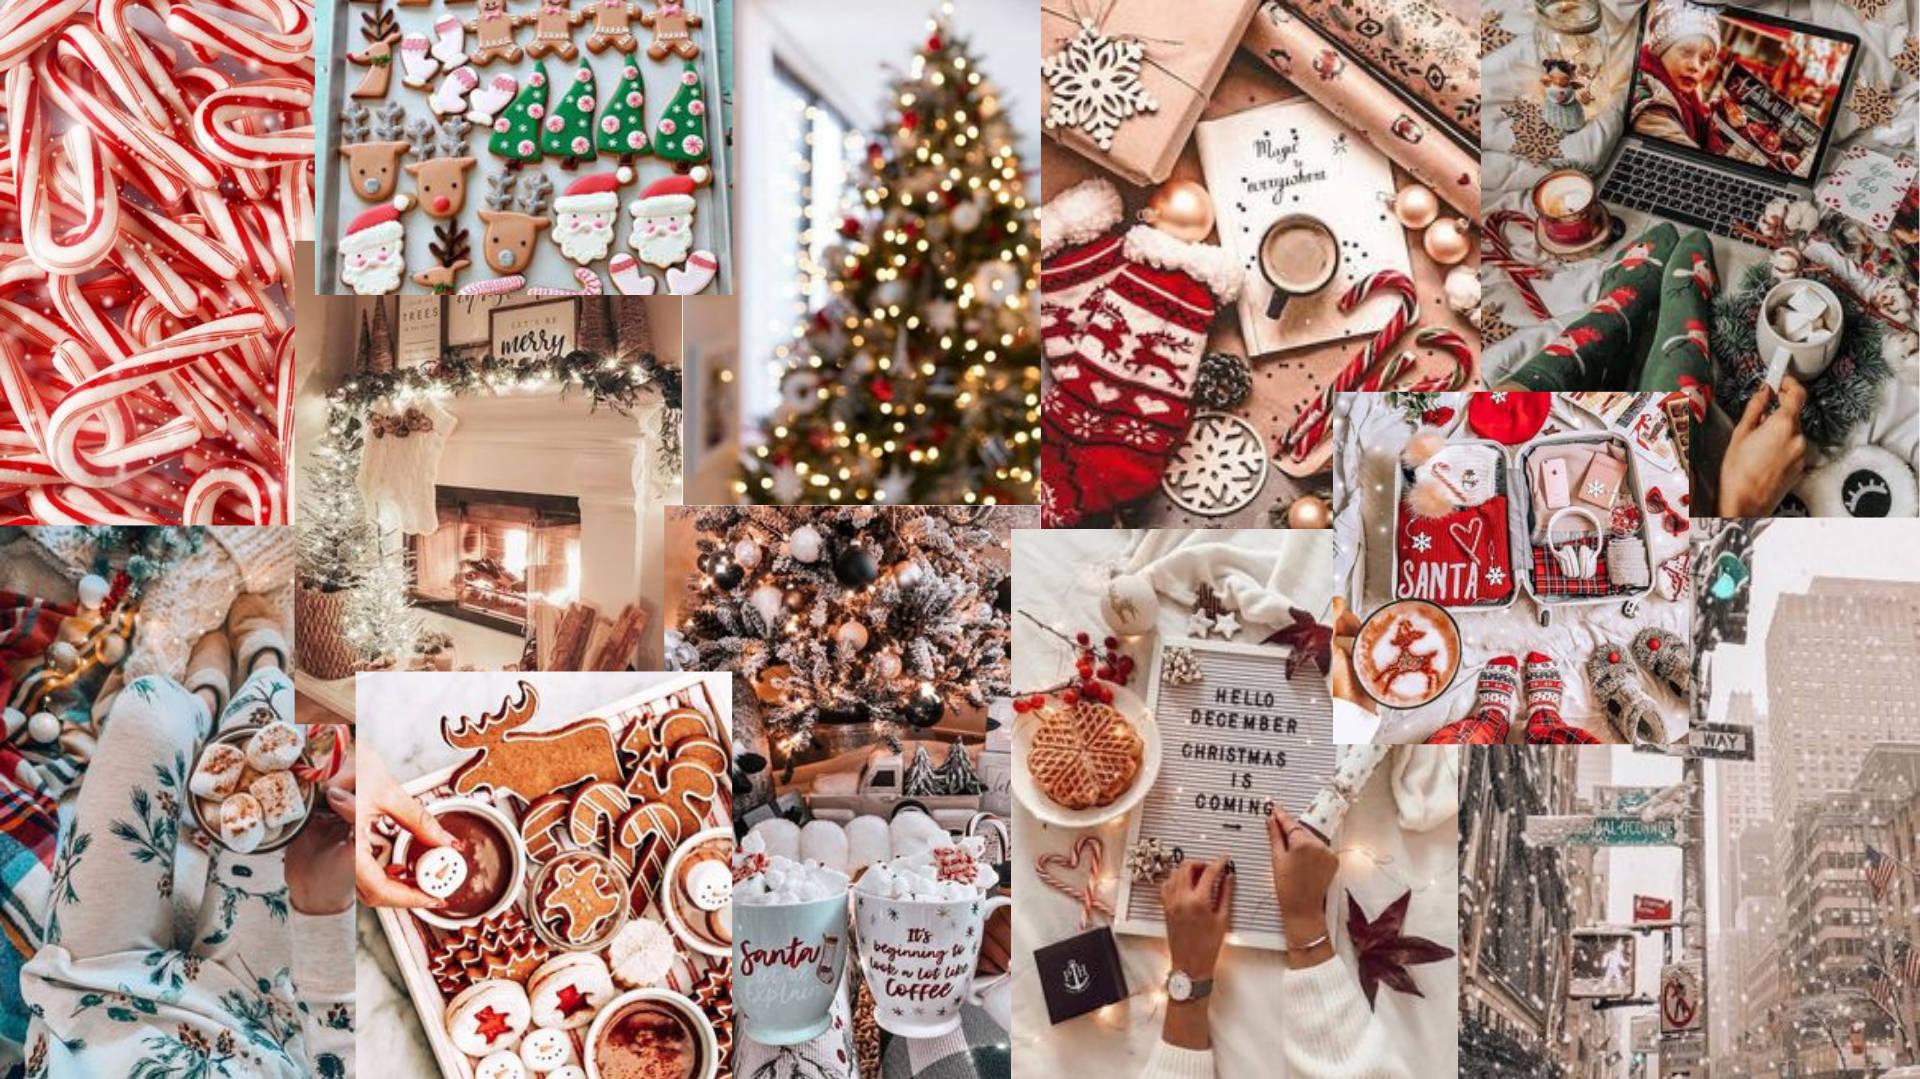 Download Preppy Christmas Collage Wallpaper